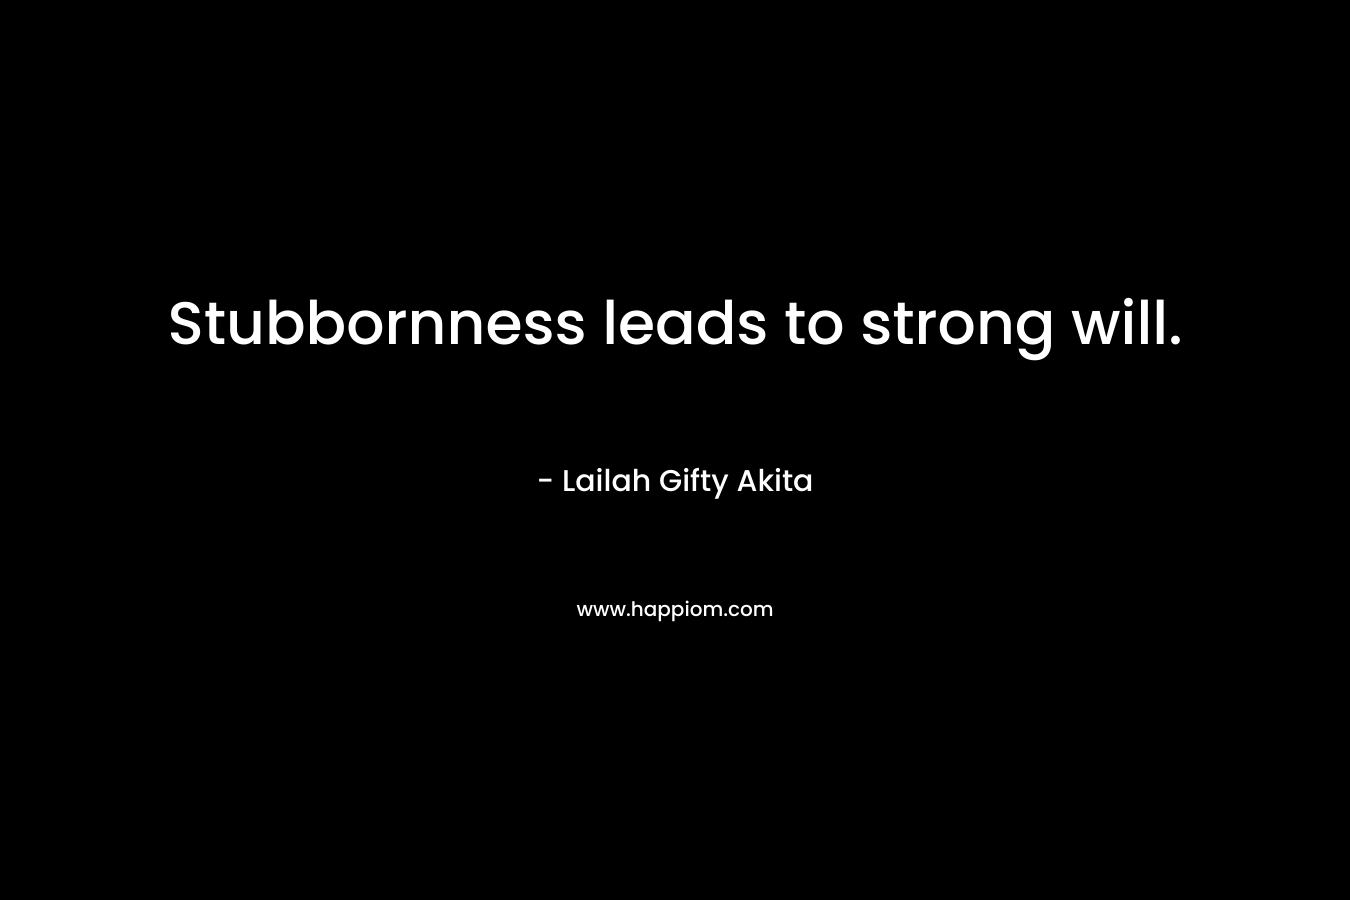 Stubbornness leads to strong will.